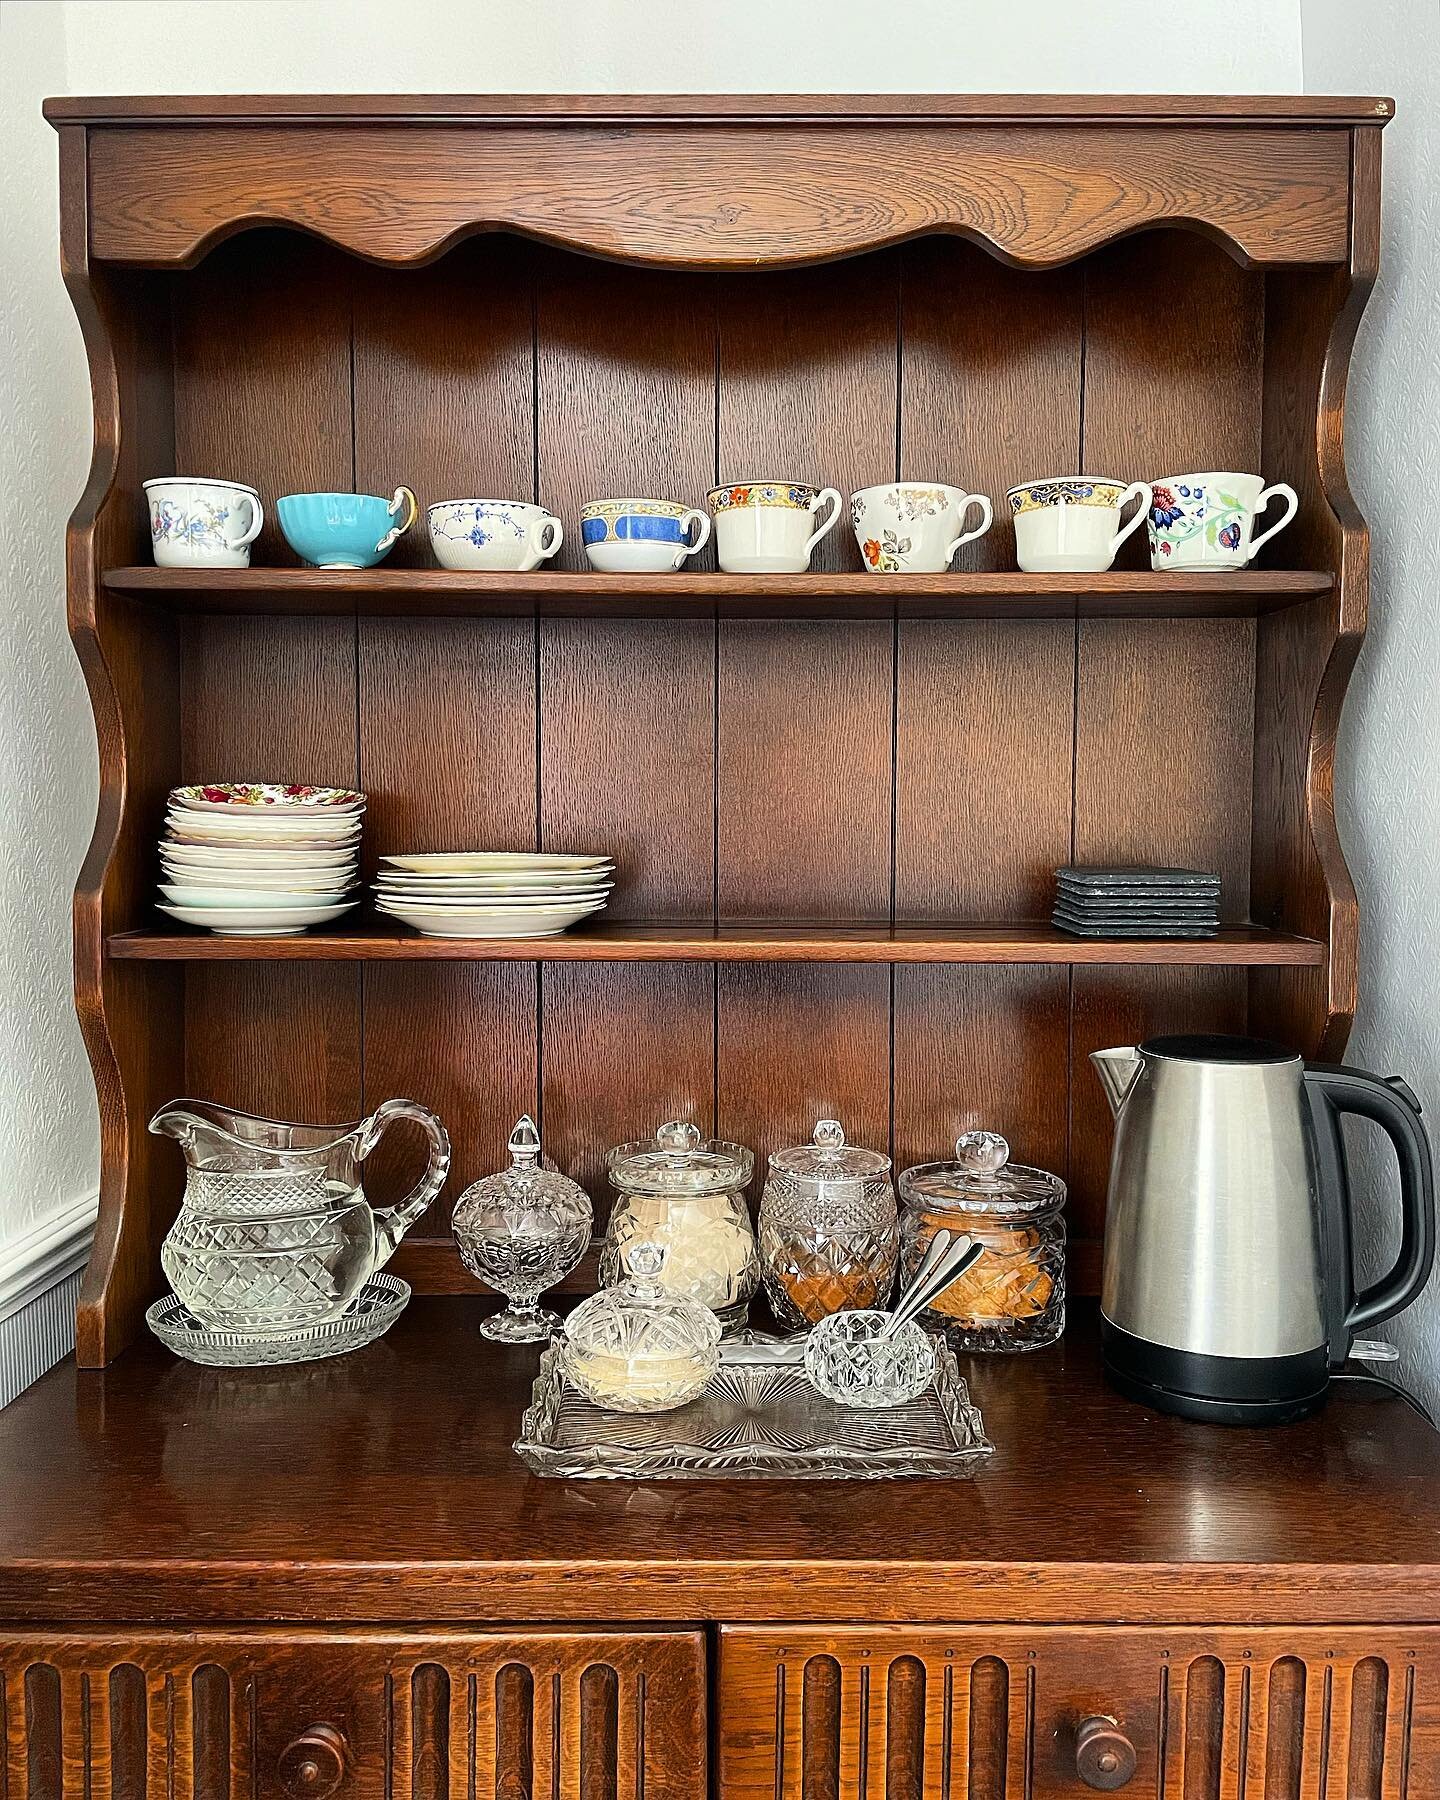 .
We&rsquo;re getting the bed and breakfast ready for our first guests, who are arriving this evening. The tea and coffee bar in the lounge is coming together quite nicely!